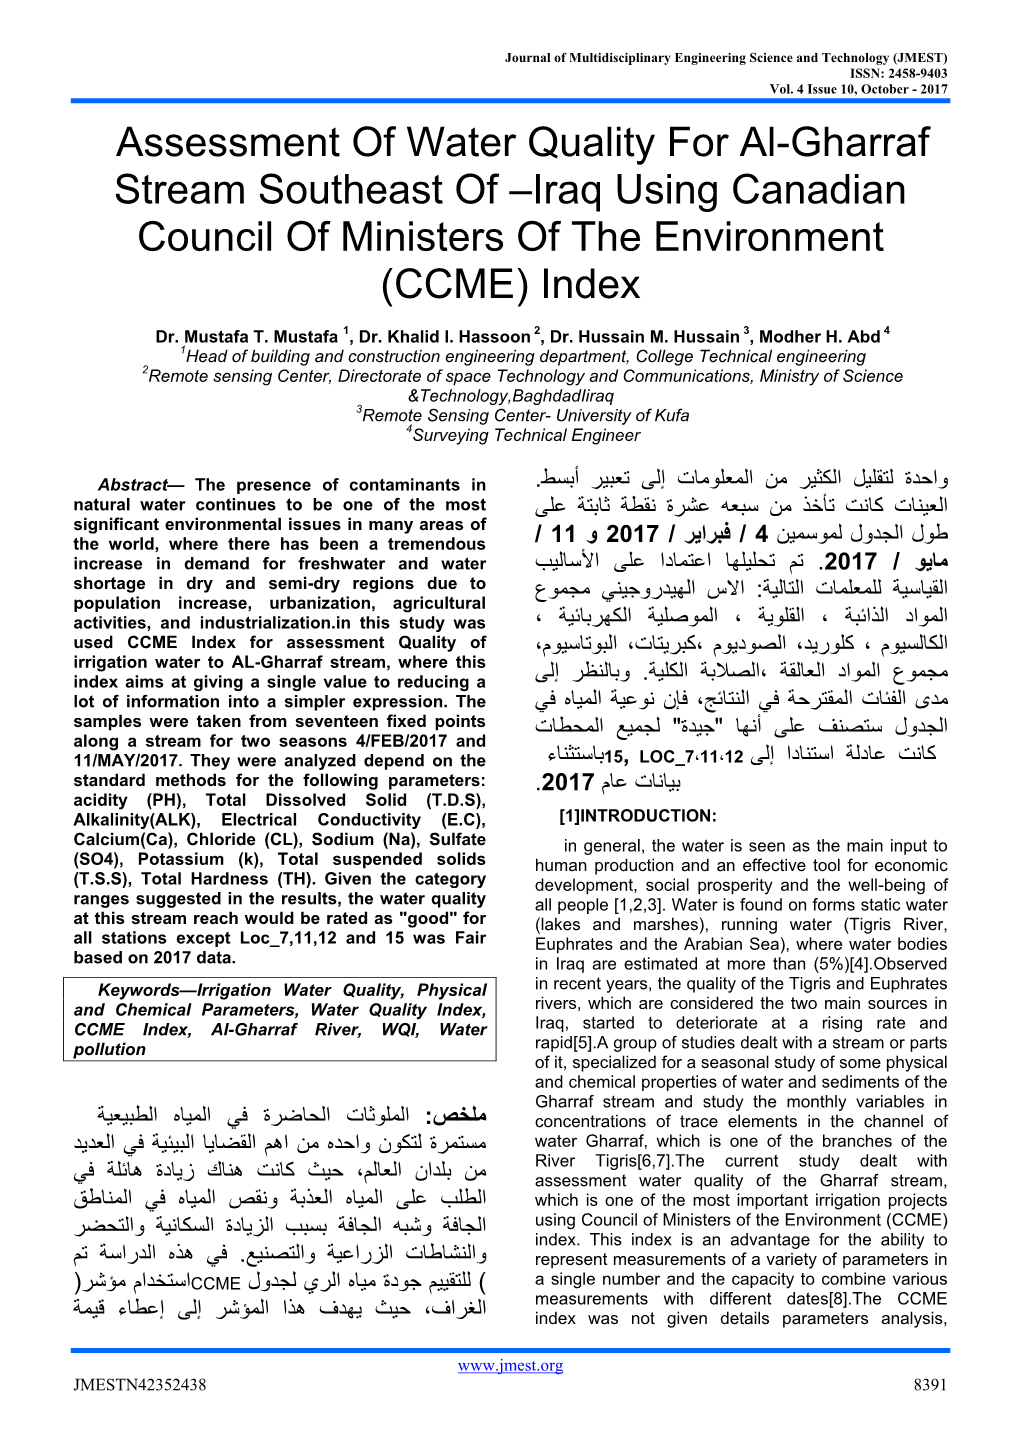 Assessment of Water Quality for Al-Gharraf Stream Southeast of –Iraq Using Canadian Council of Ministers of the Environment (CCME) Index